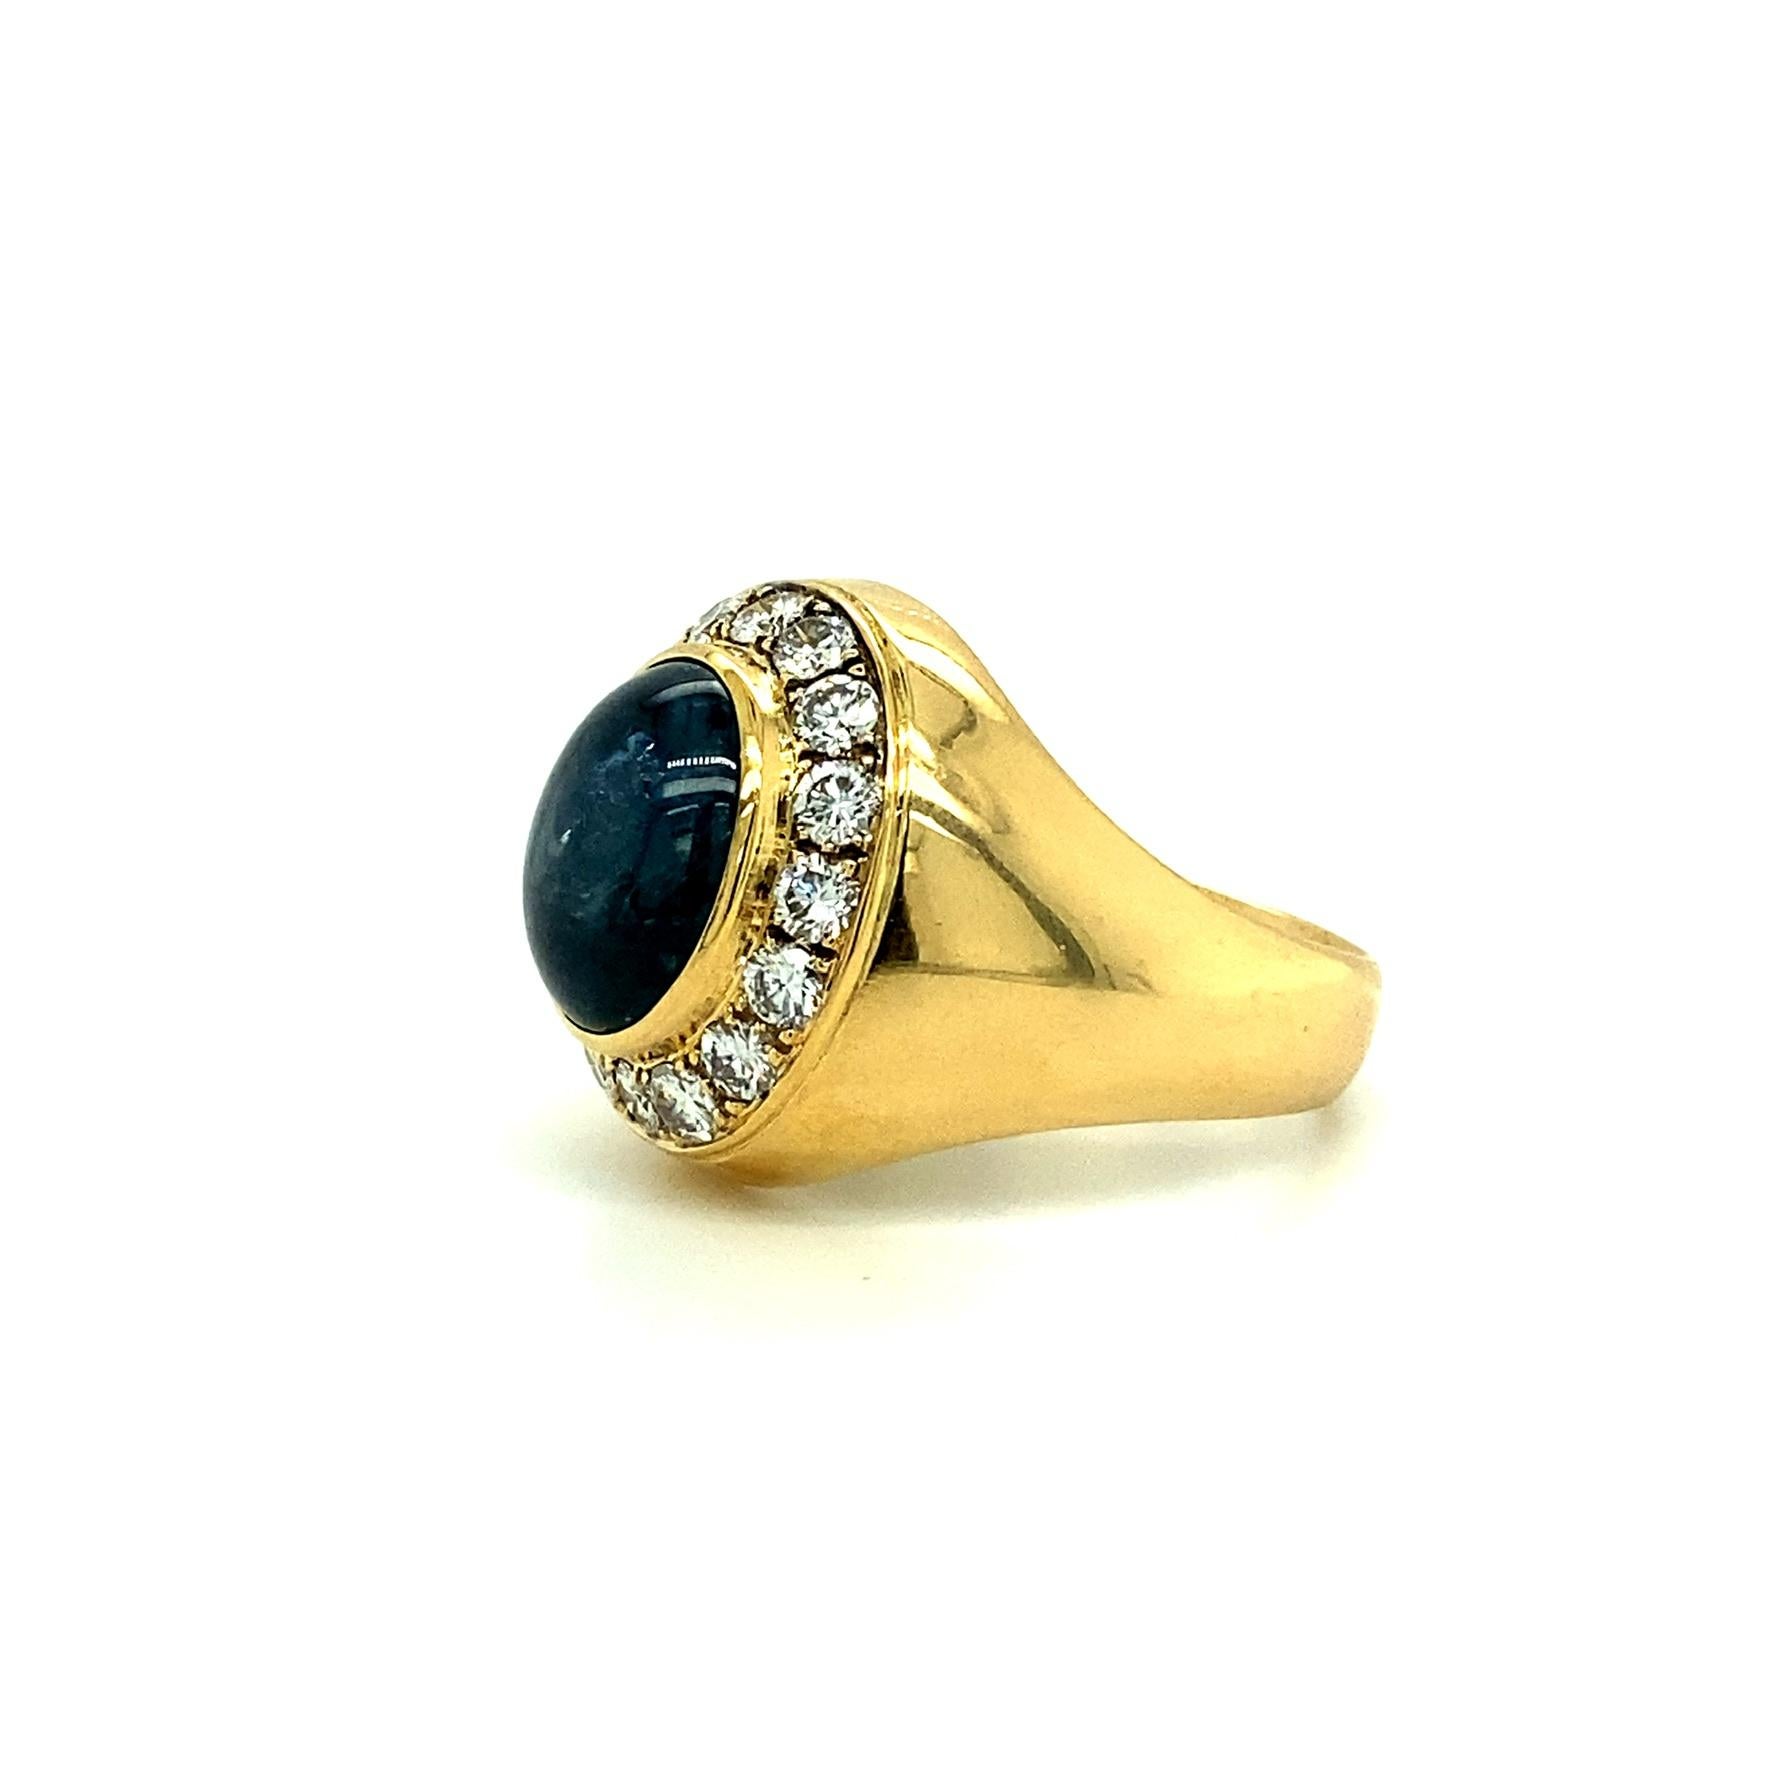 Offered here is a gorgeous large men’s ring, featuring one natural unheated earth-mined G.I.A certified oval cabachon blue star sapphire displaying asterism, weighing 16.25 ct. 
Framed with 16 natural sparkly bright white diamonds weighing